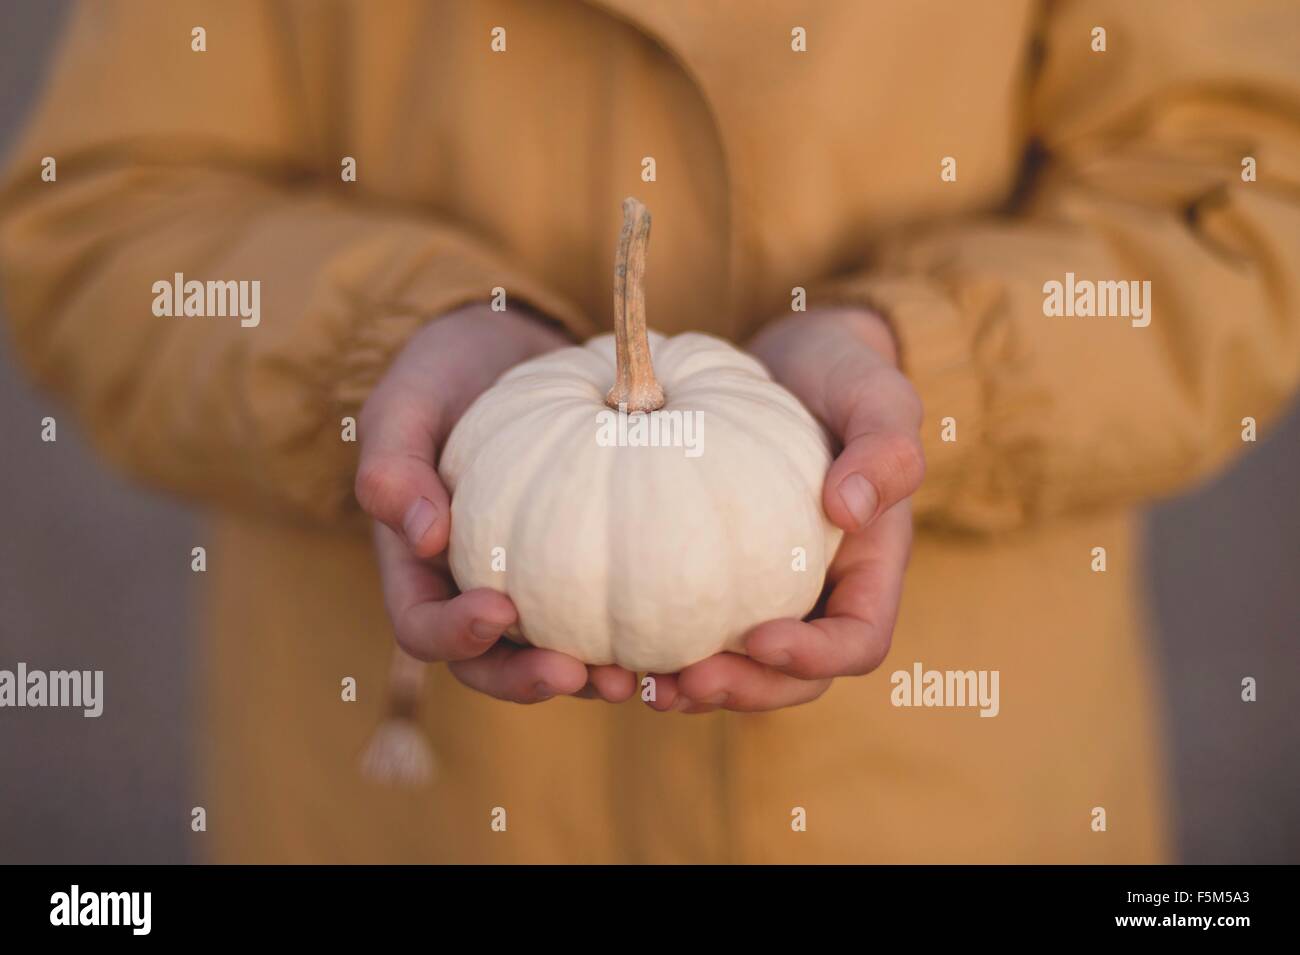 Young girl holding small pumpkin, mid section Stock Photo